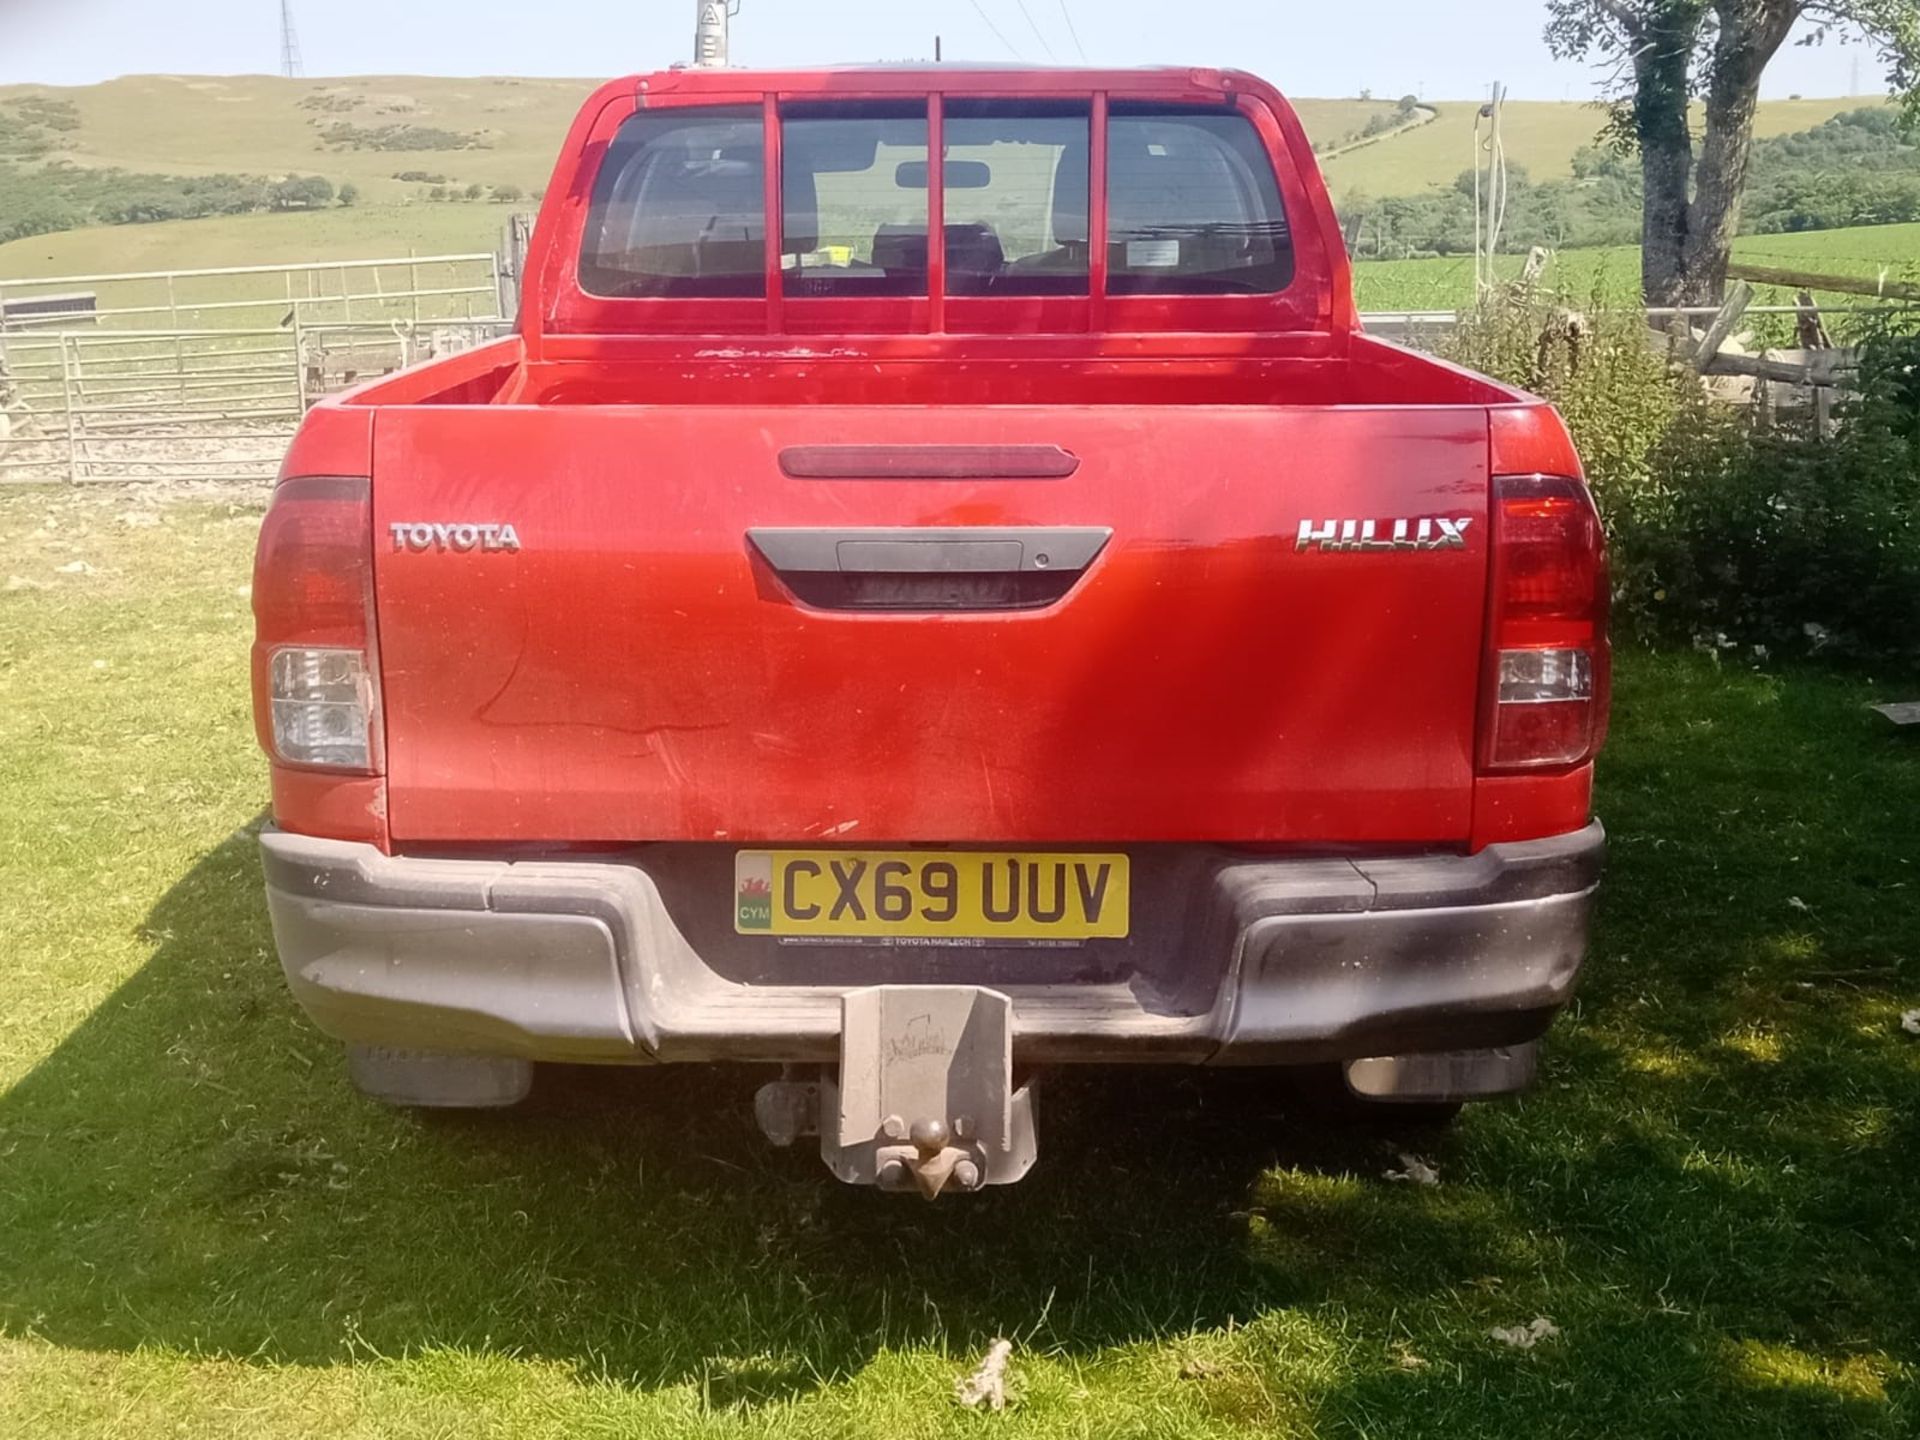 TOYOTA HILUX PICKUP - Image 3 of 5